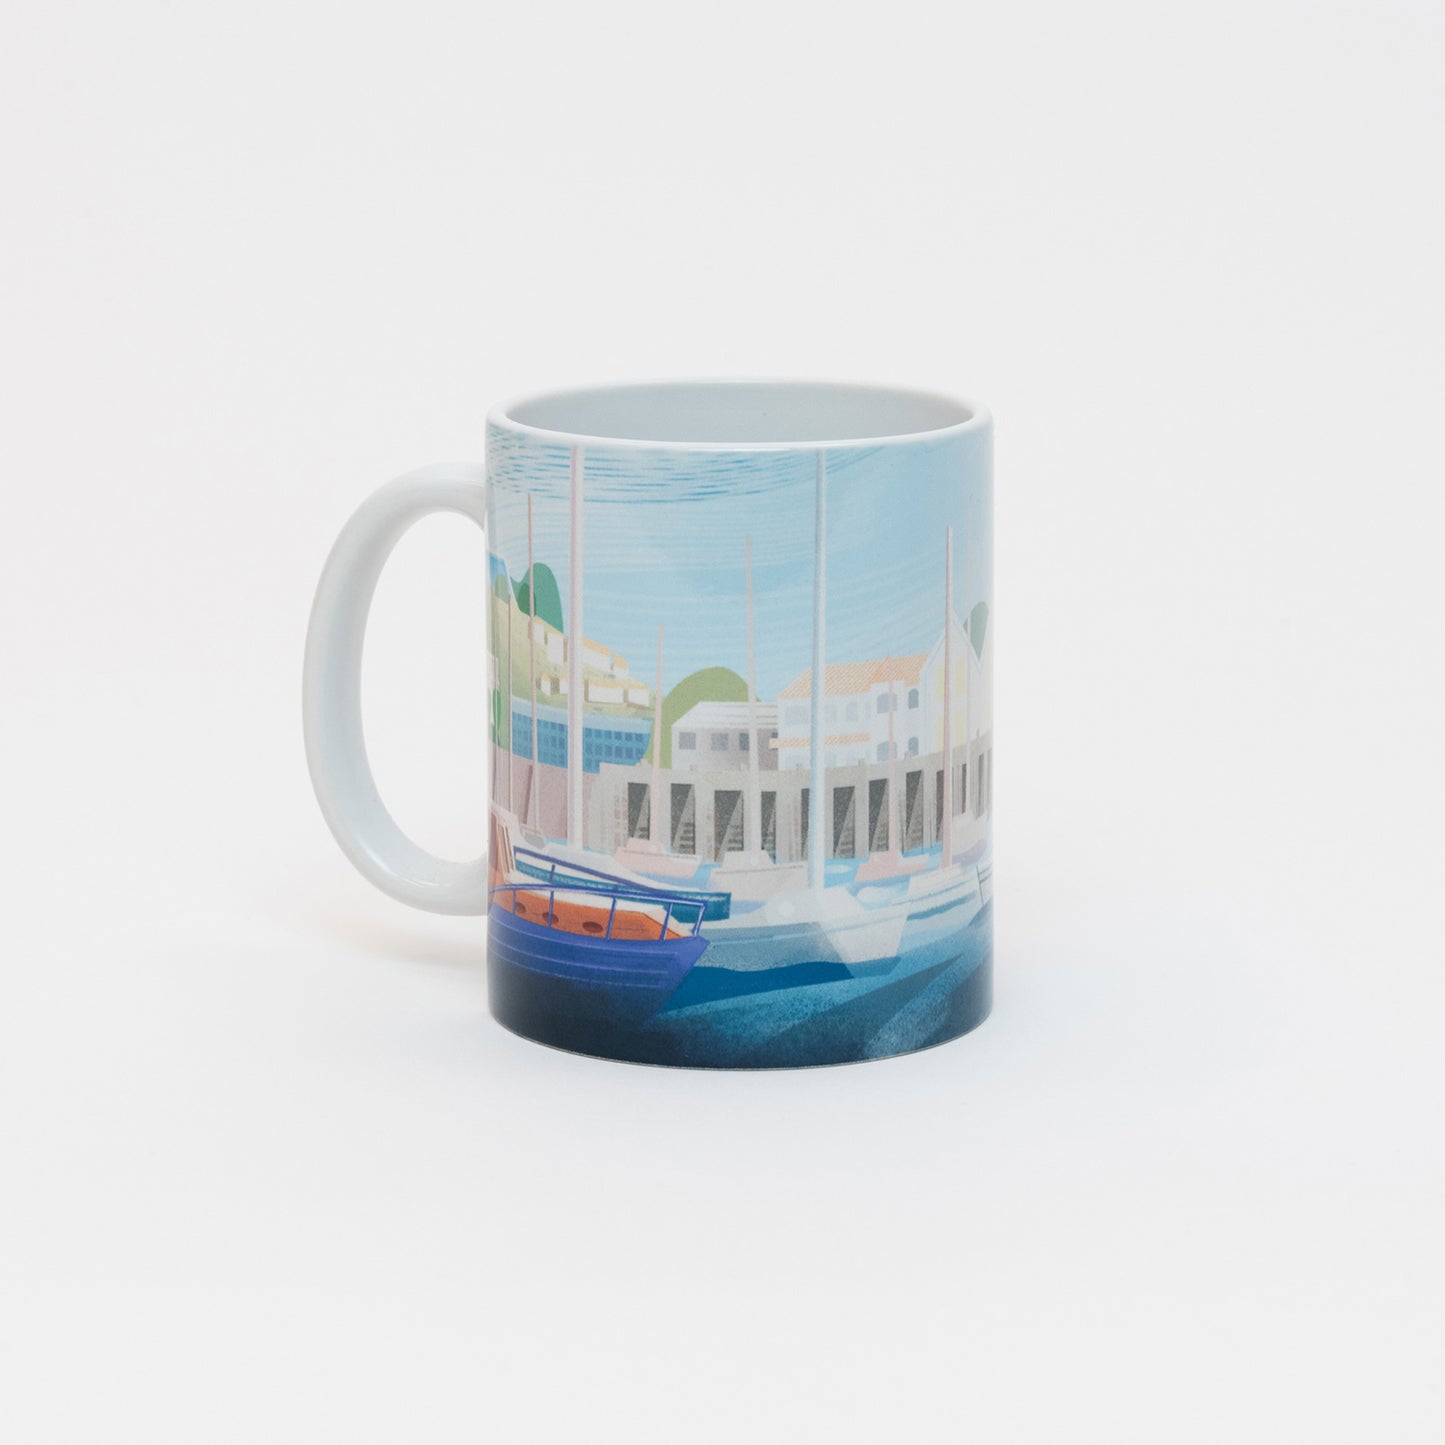 The back view of the white mug with an illustration of National Maritime Museum Cornwall and Falmouth.